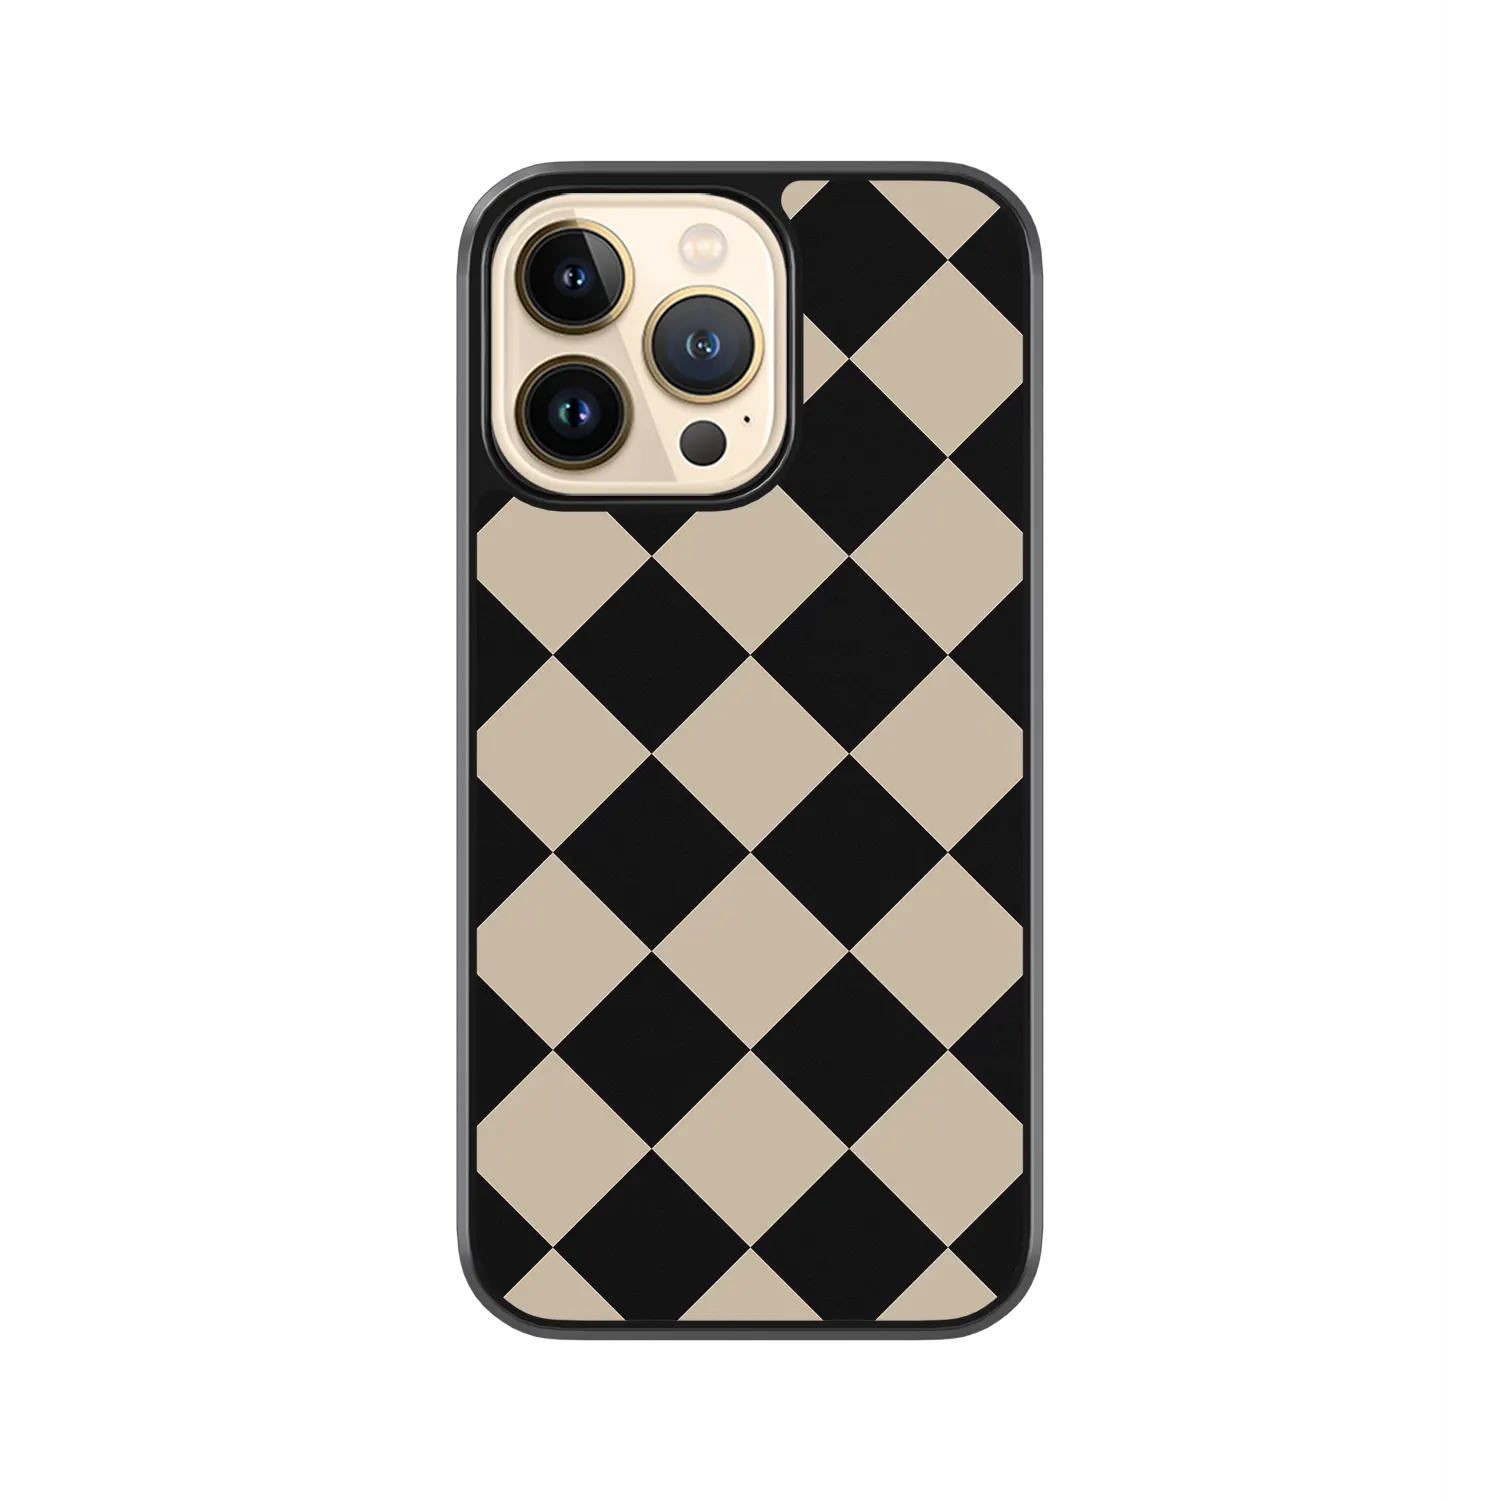 Chess iphone 11 pro max case